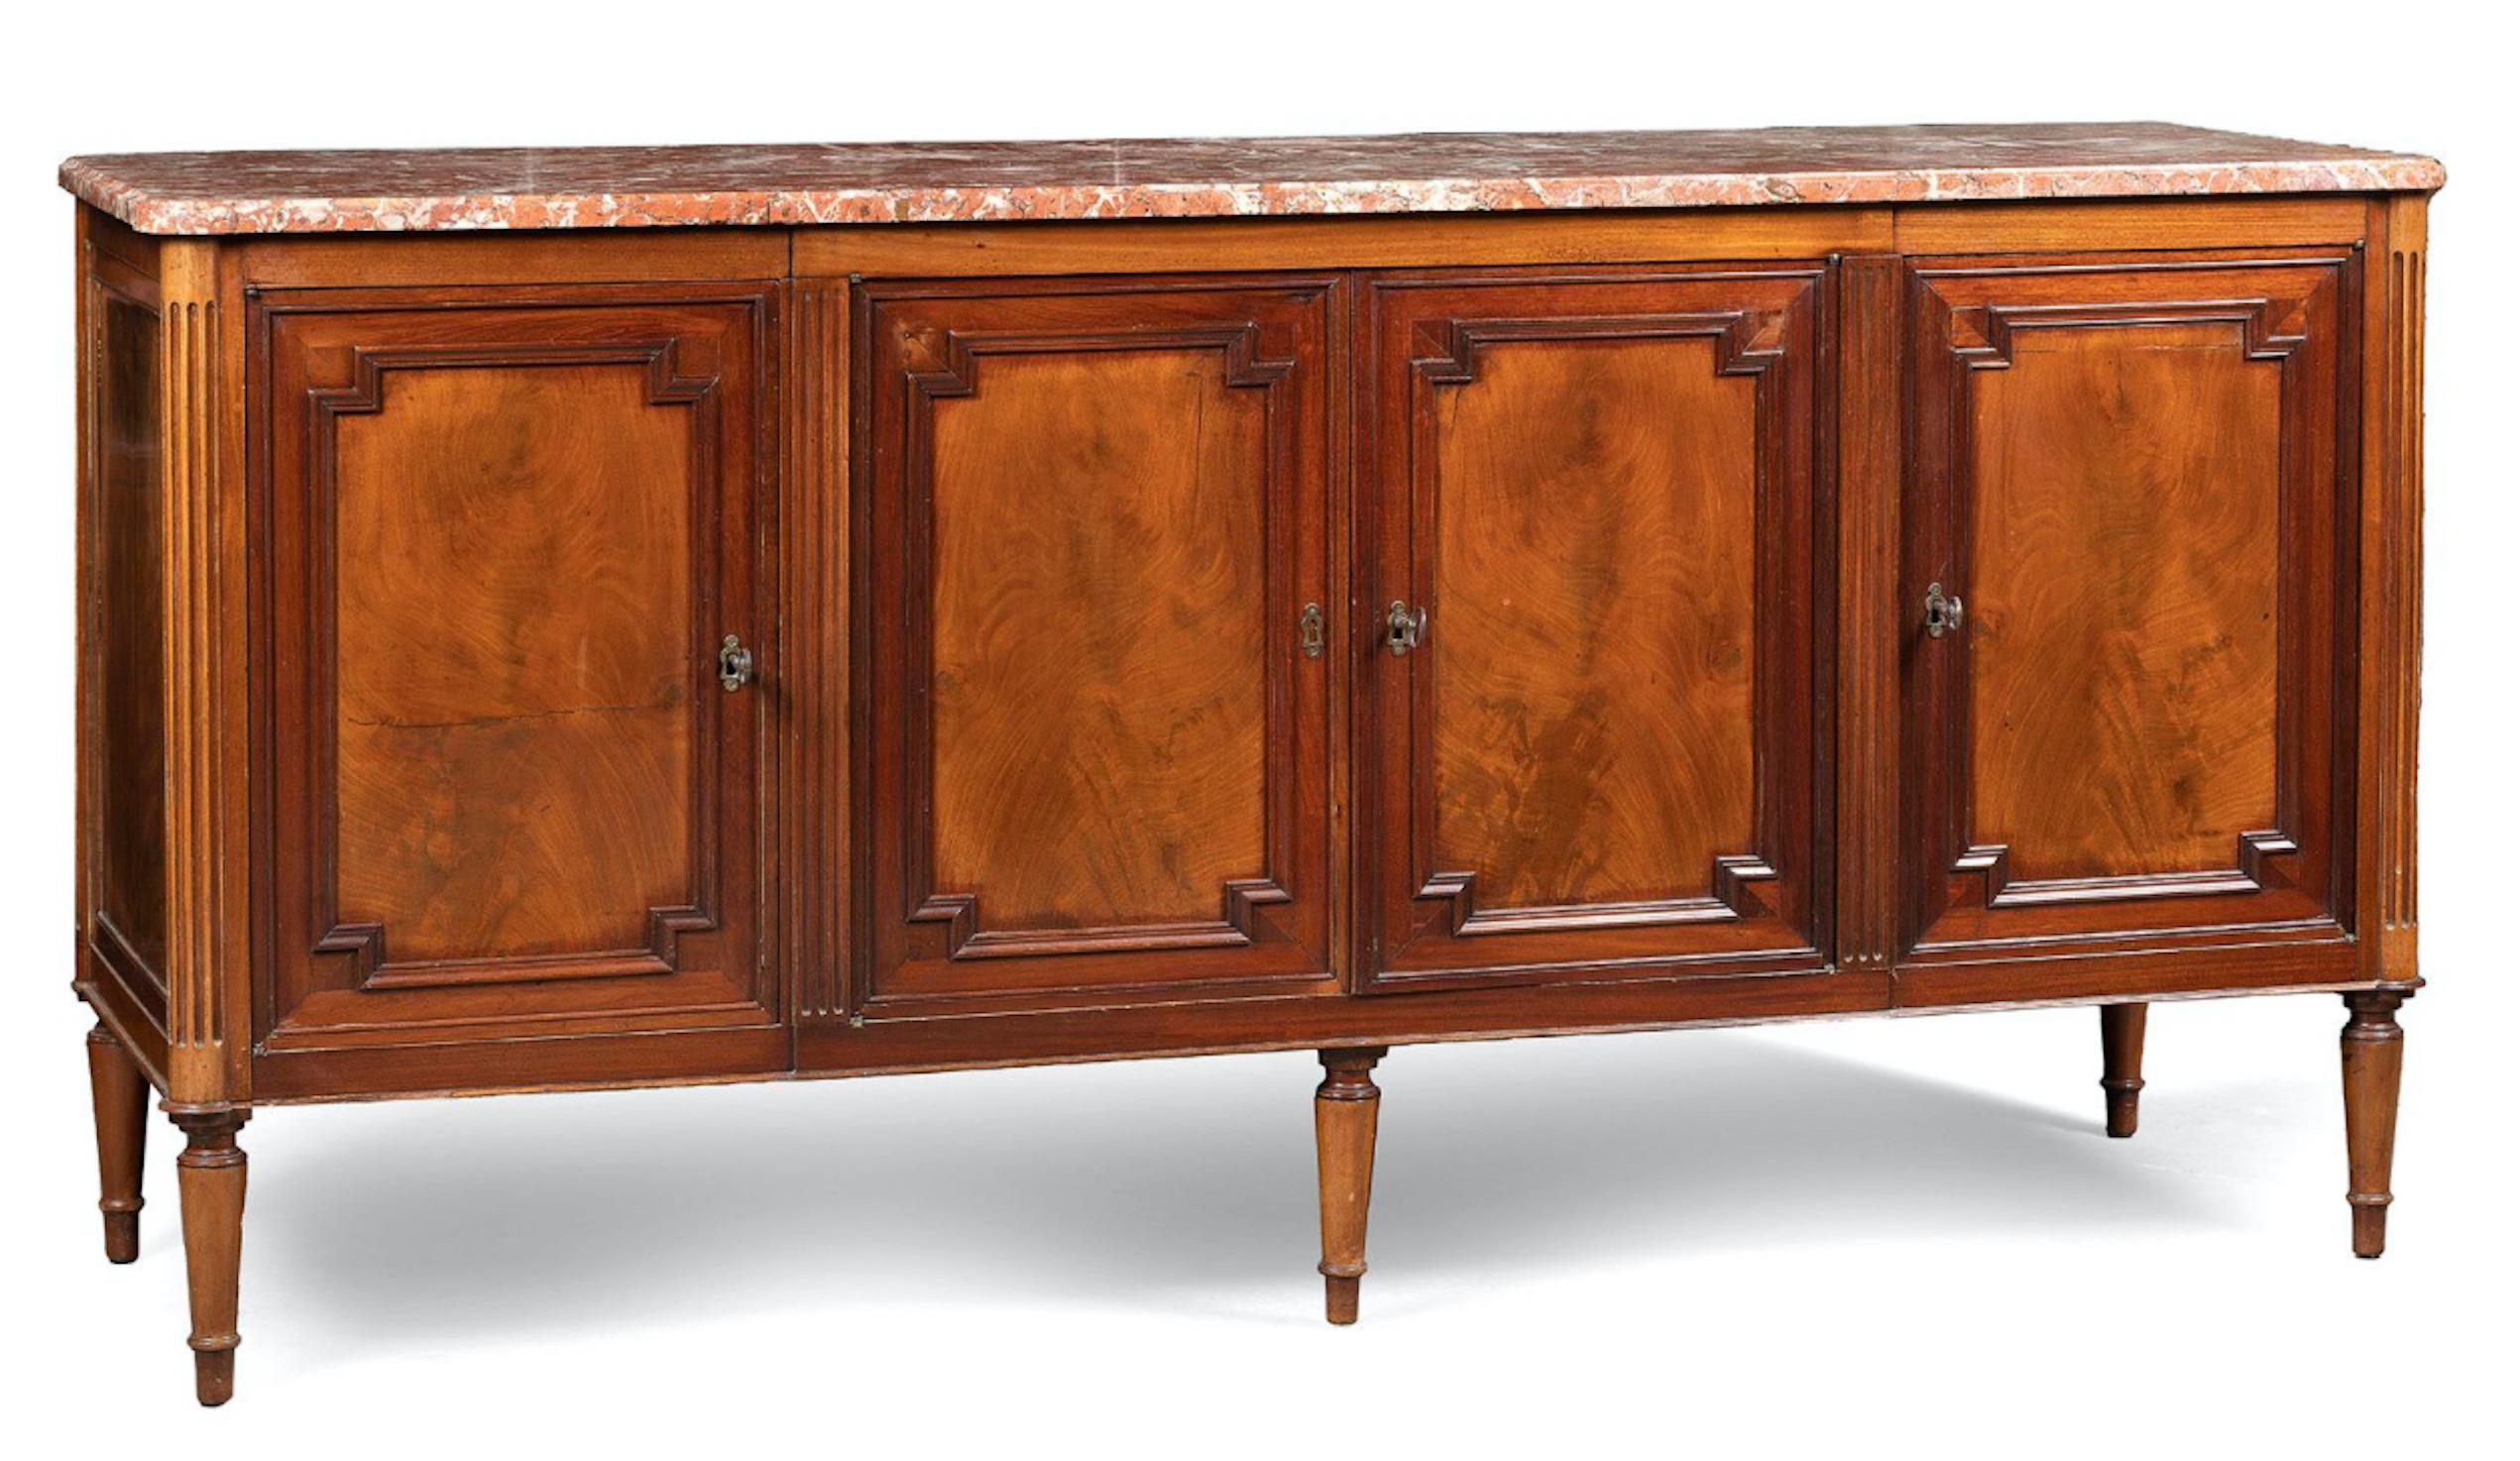 Row buffet in moulded and veneered solid oak and mahogany. Front part is made with a slight central opening projection by four leaves, punctuated by fluted uprights, those at the ends rounded, and resting on five tapered legs, three in front and two